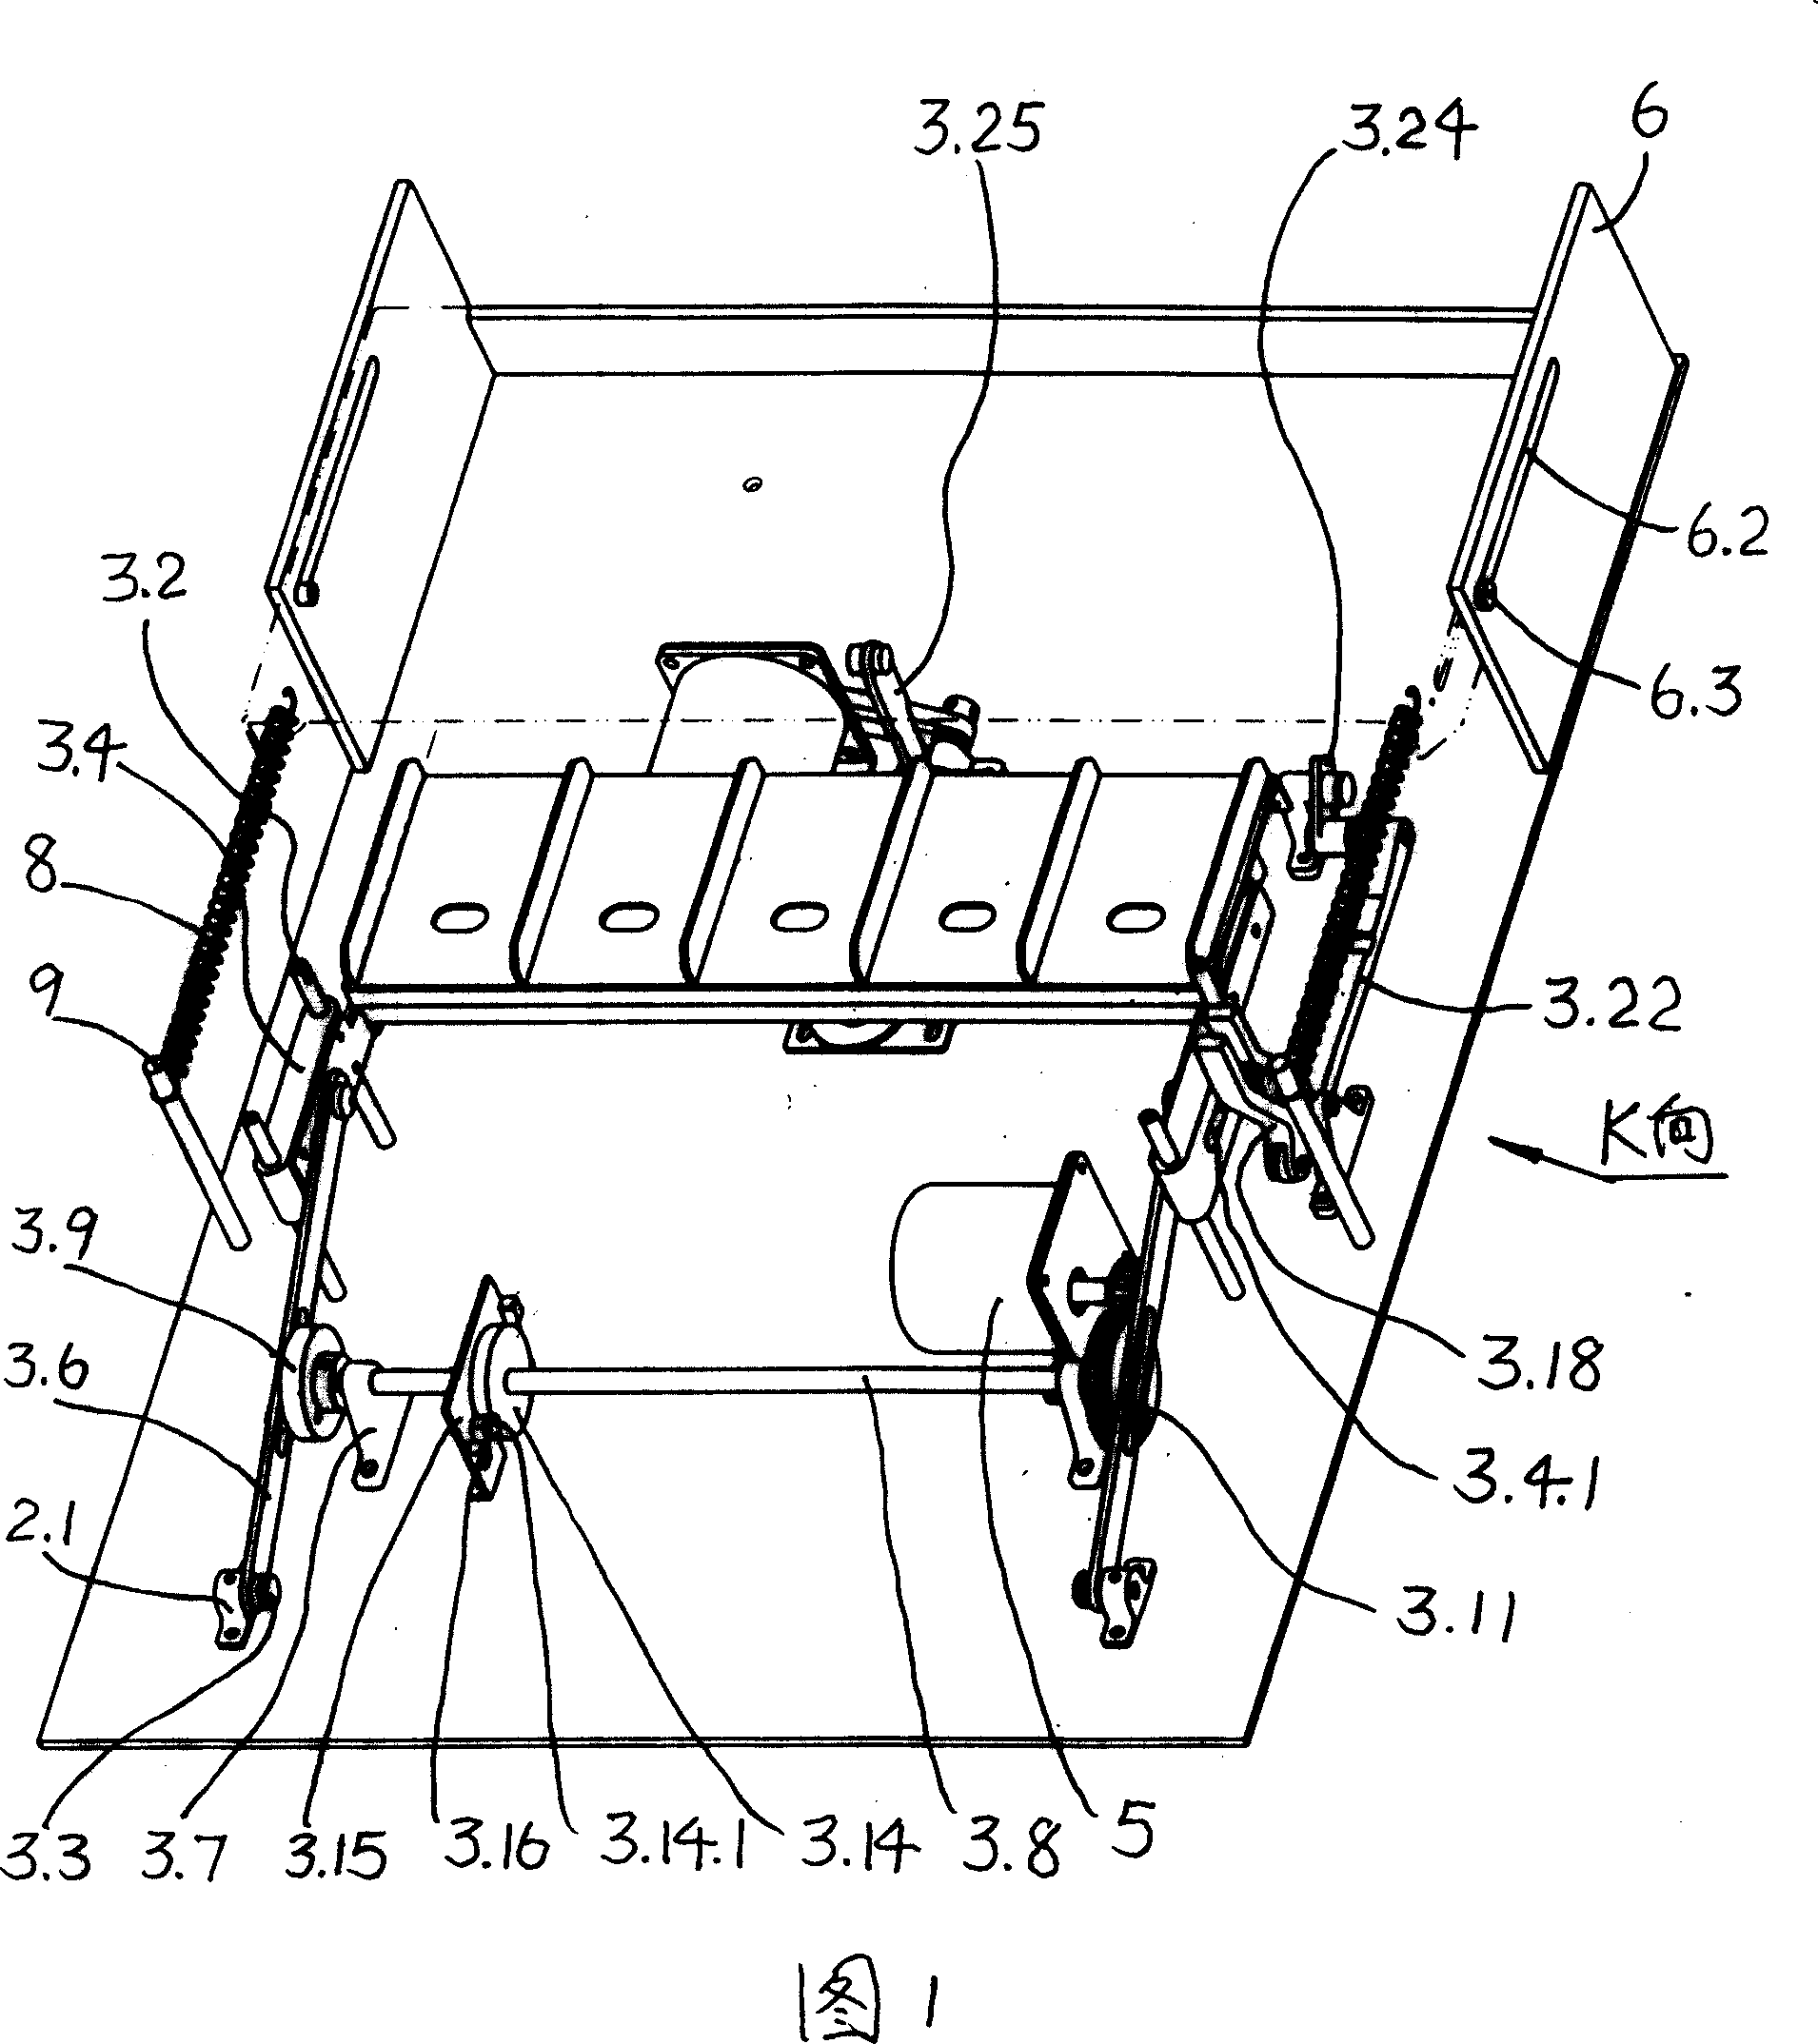 Cover-opening device for automatic playing card machine